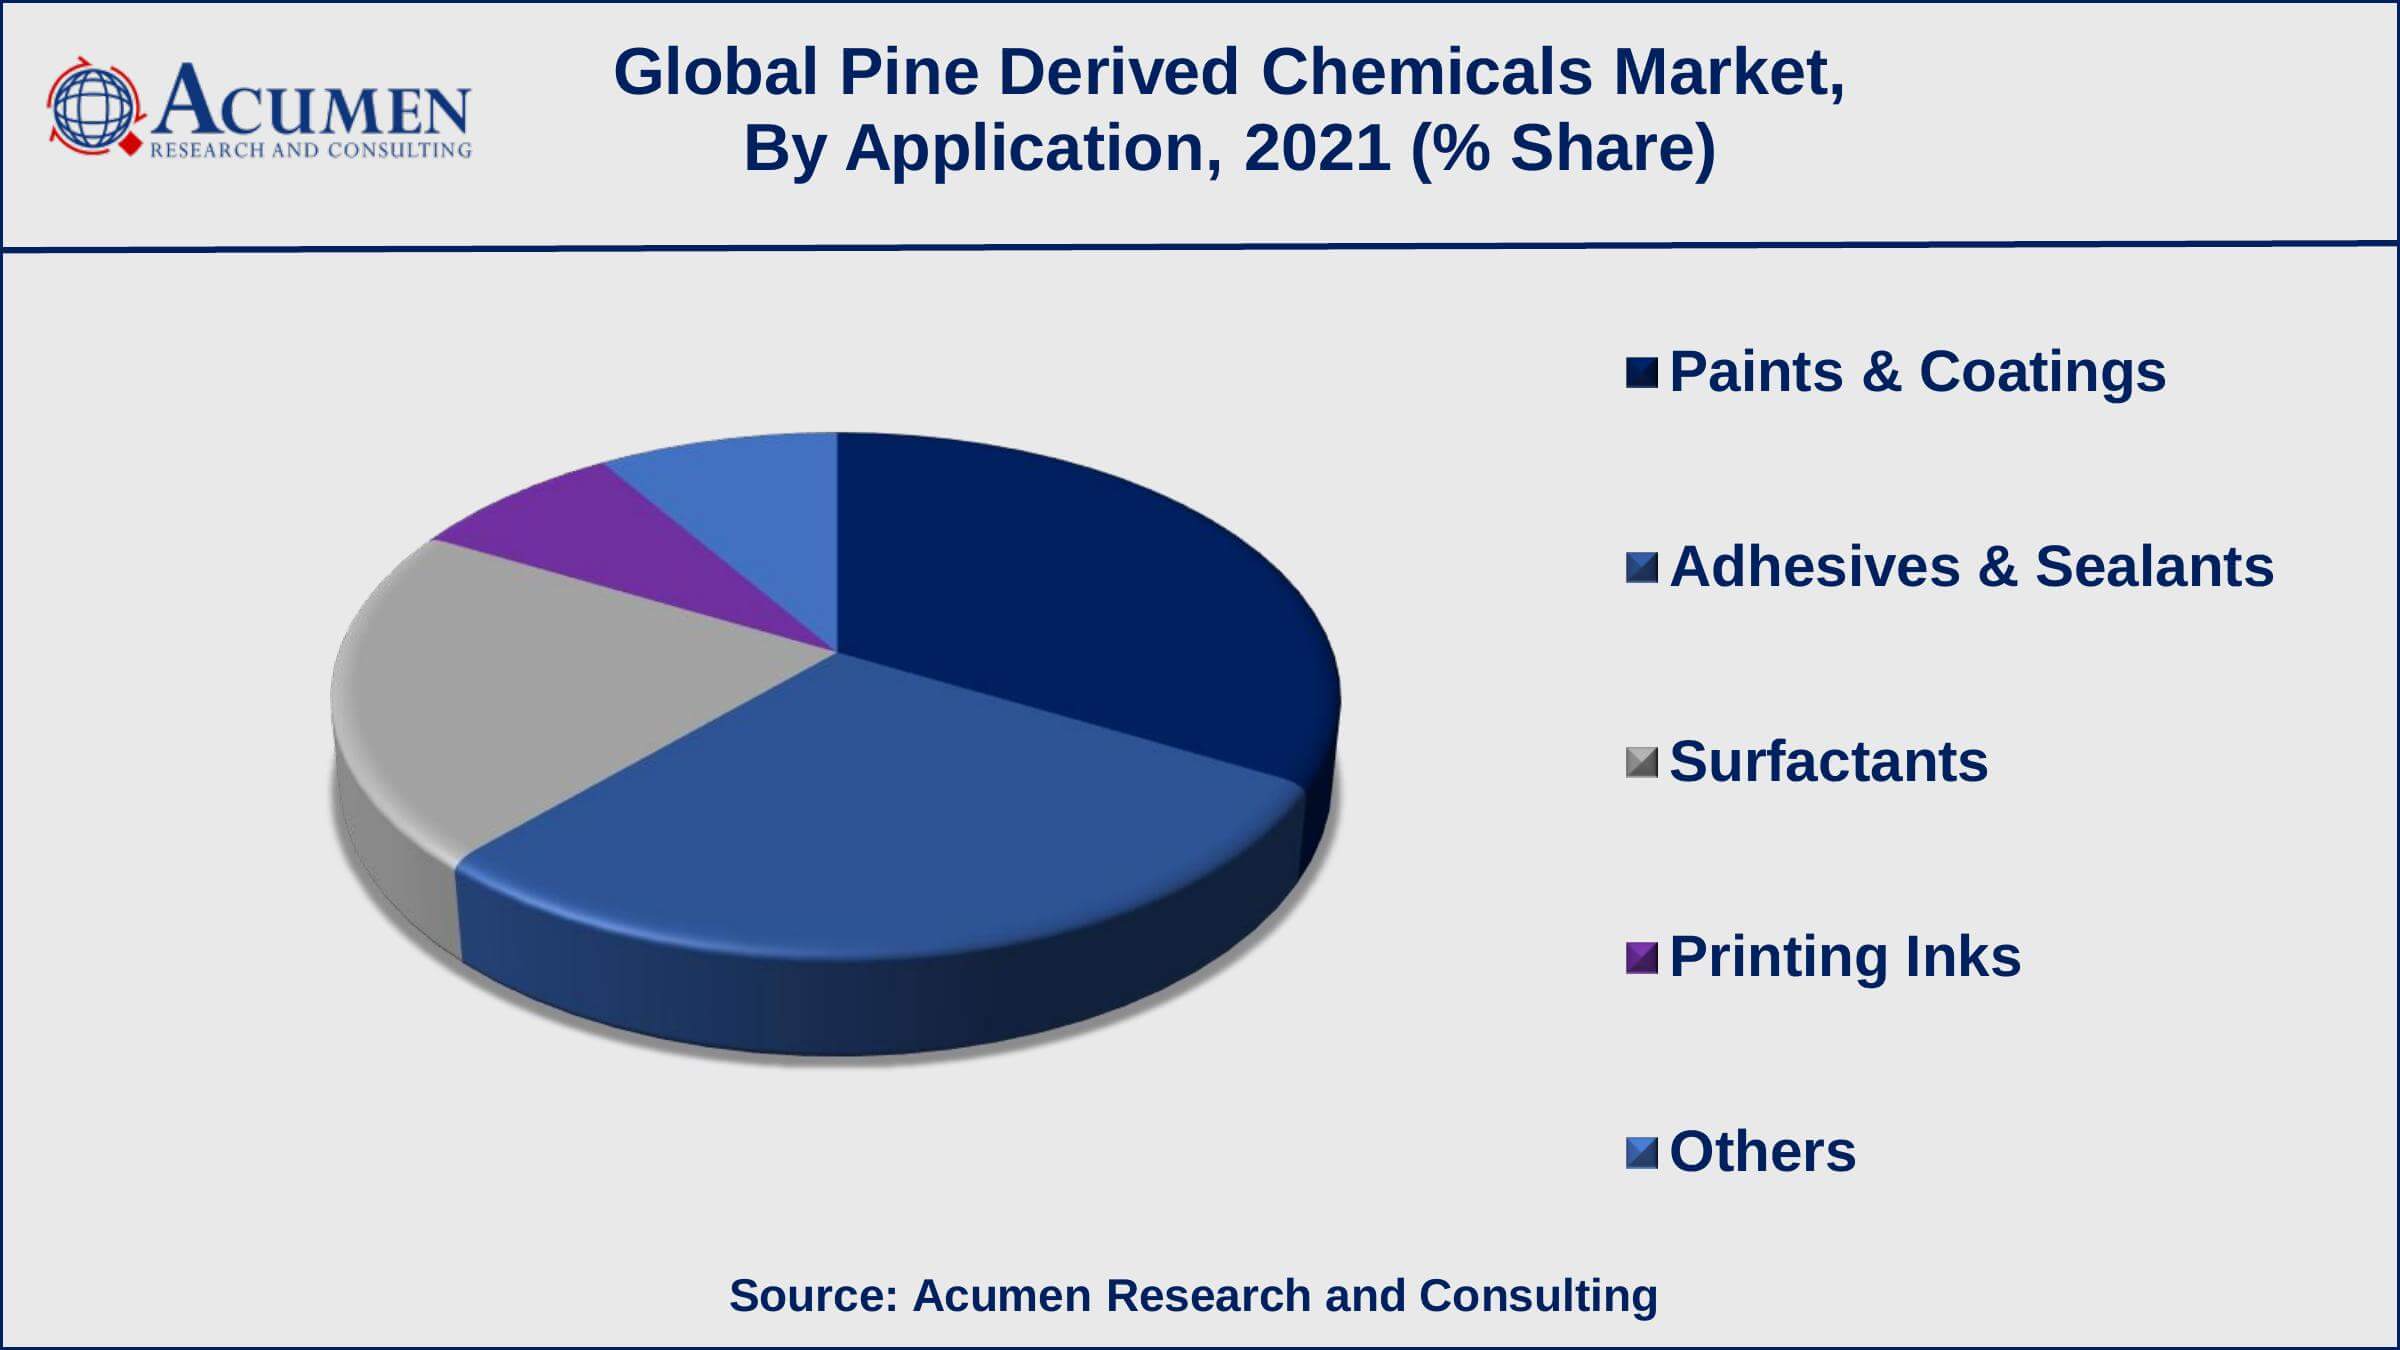 Among application, paints & coatings sector generated shares of over 35% in 2021